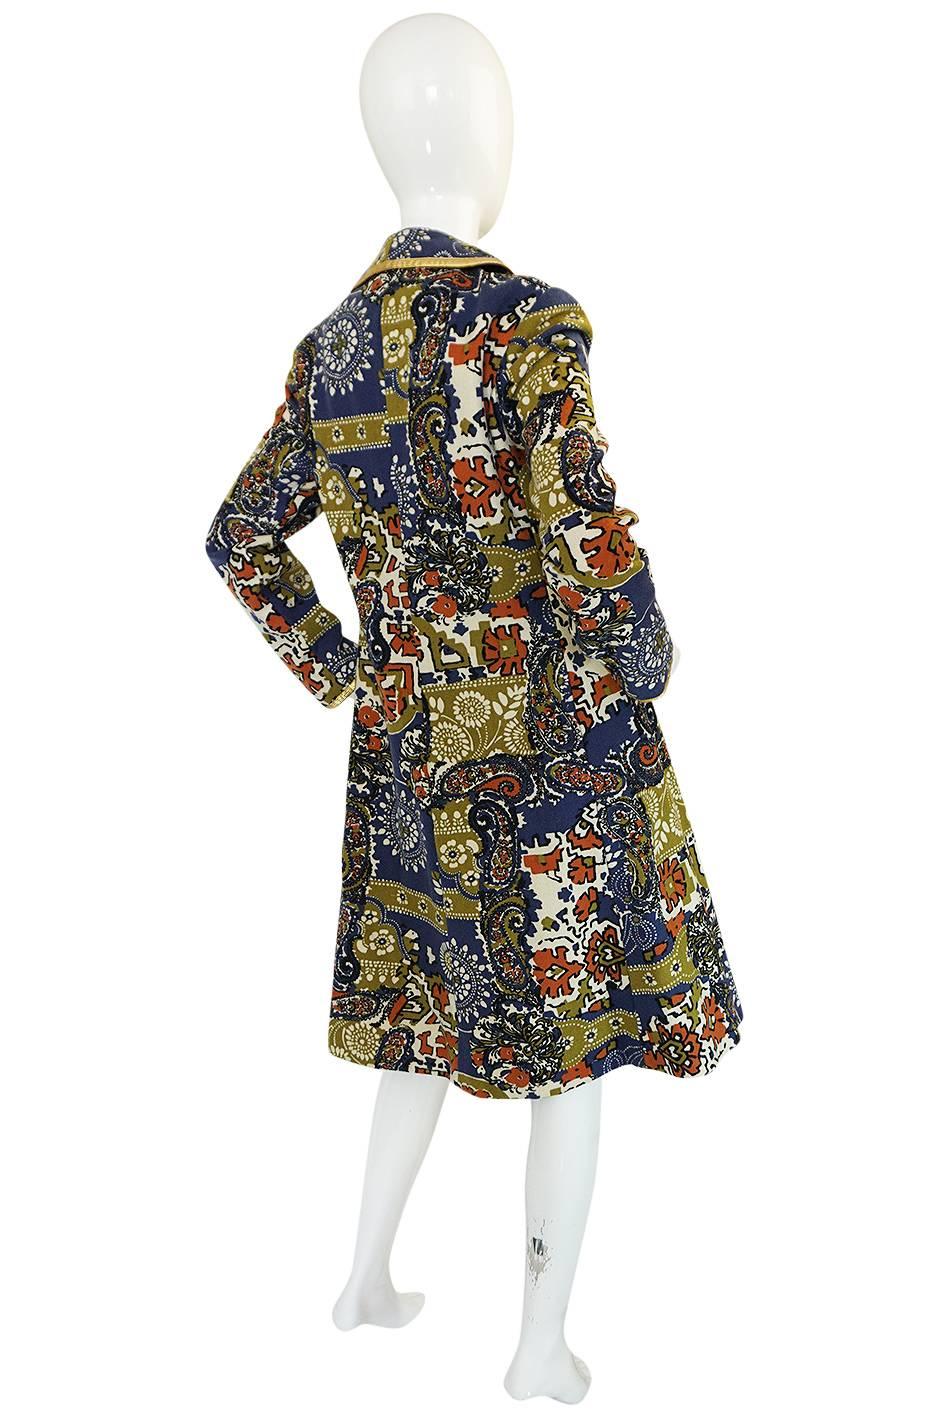 A year or so ago I had the dress that matches this coat and I am sad that I did not find the two at the same time. Regardless of that this is an absolutely gorgeous Malcolm Starr coat with superb detailing. It is made of a felted wool with a